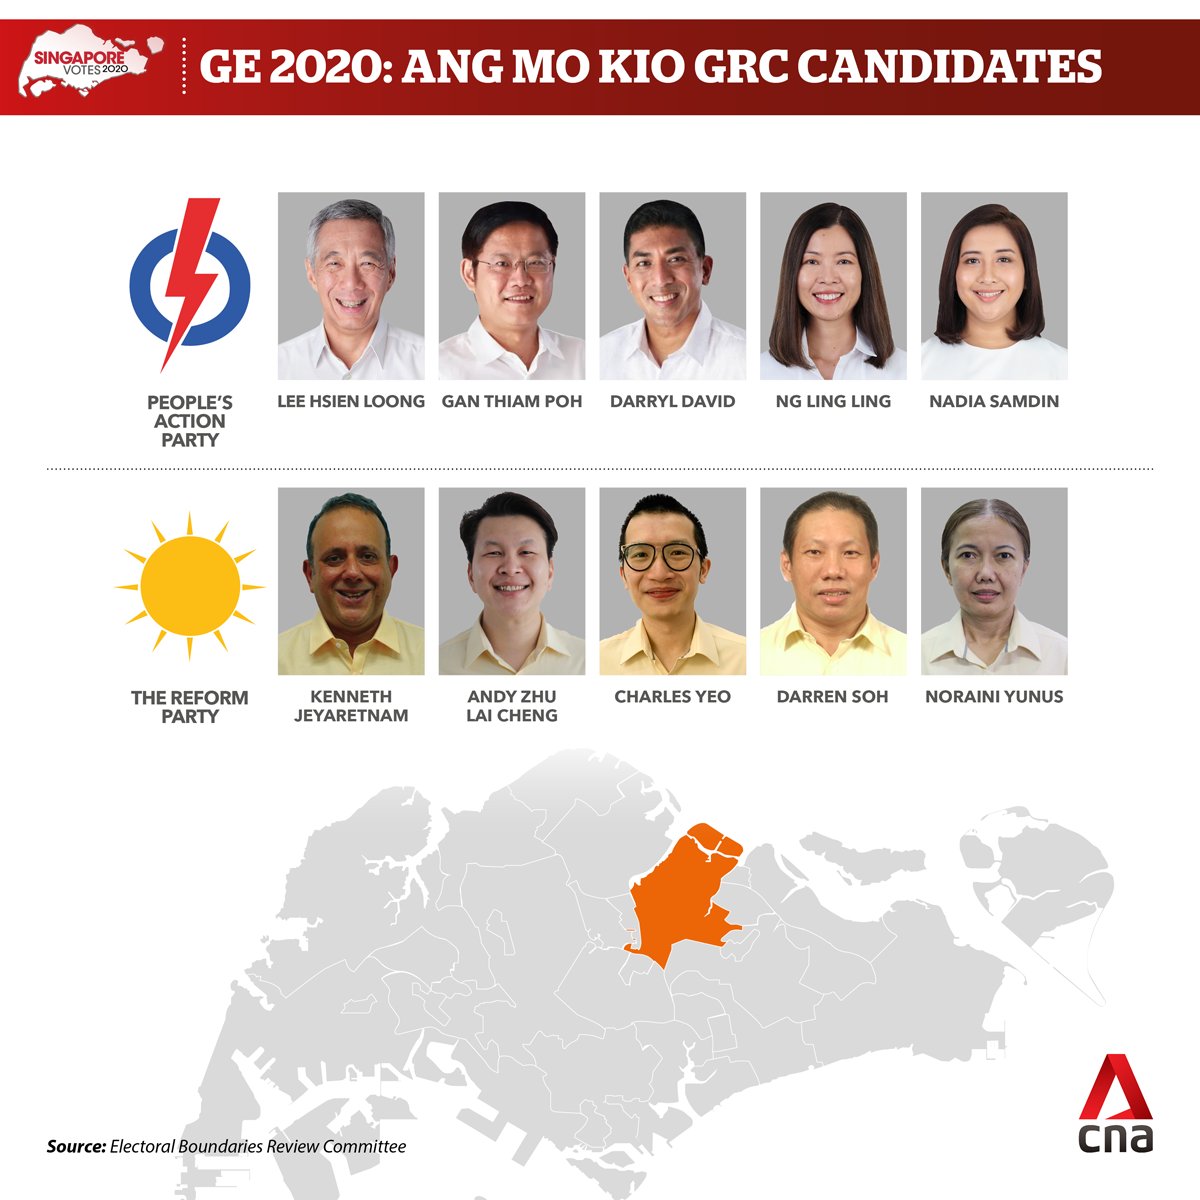  #GE2020  : The Reform Party goes up against PM Lee Hsien Loong's PAP team in Ang Mo Kio GRC, again  http://cna.asia/3g5eM3U 